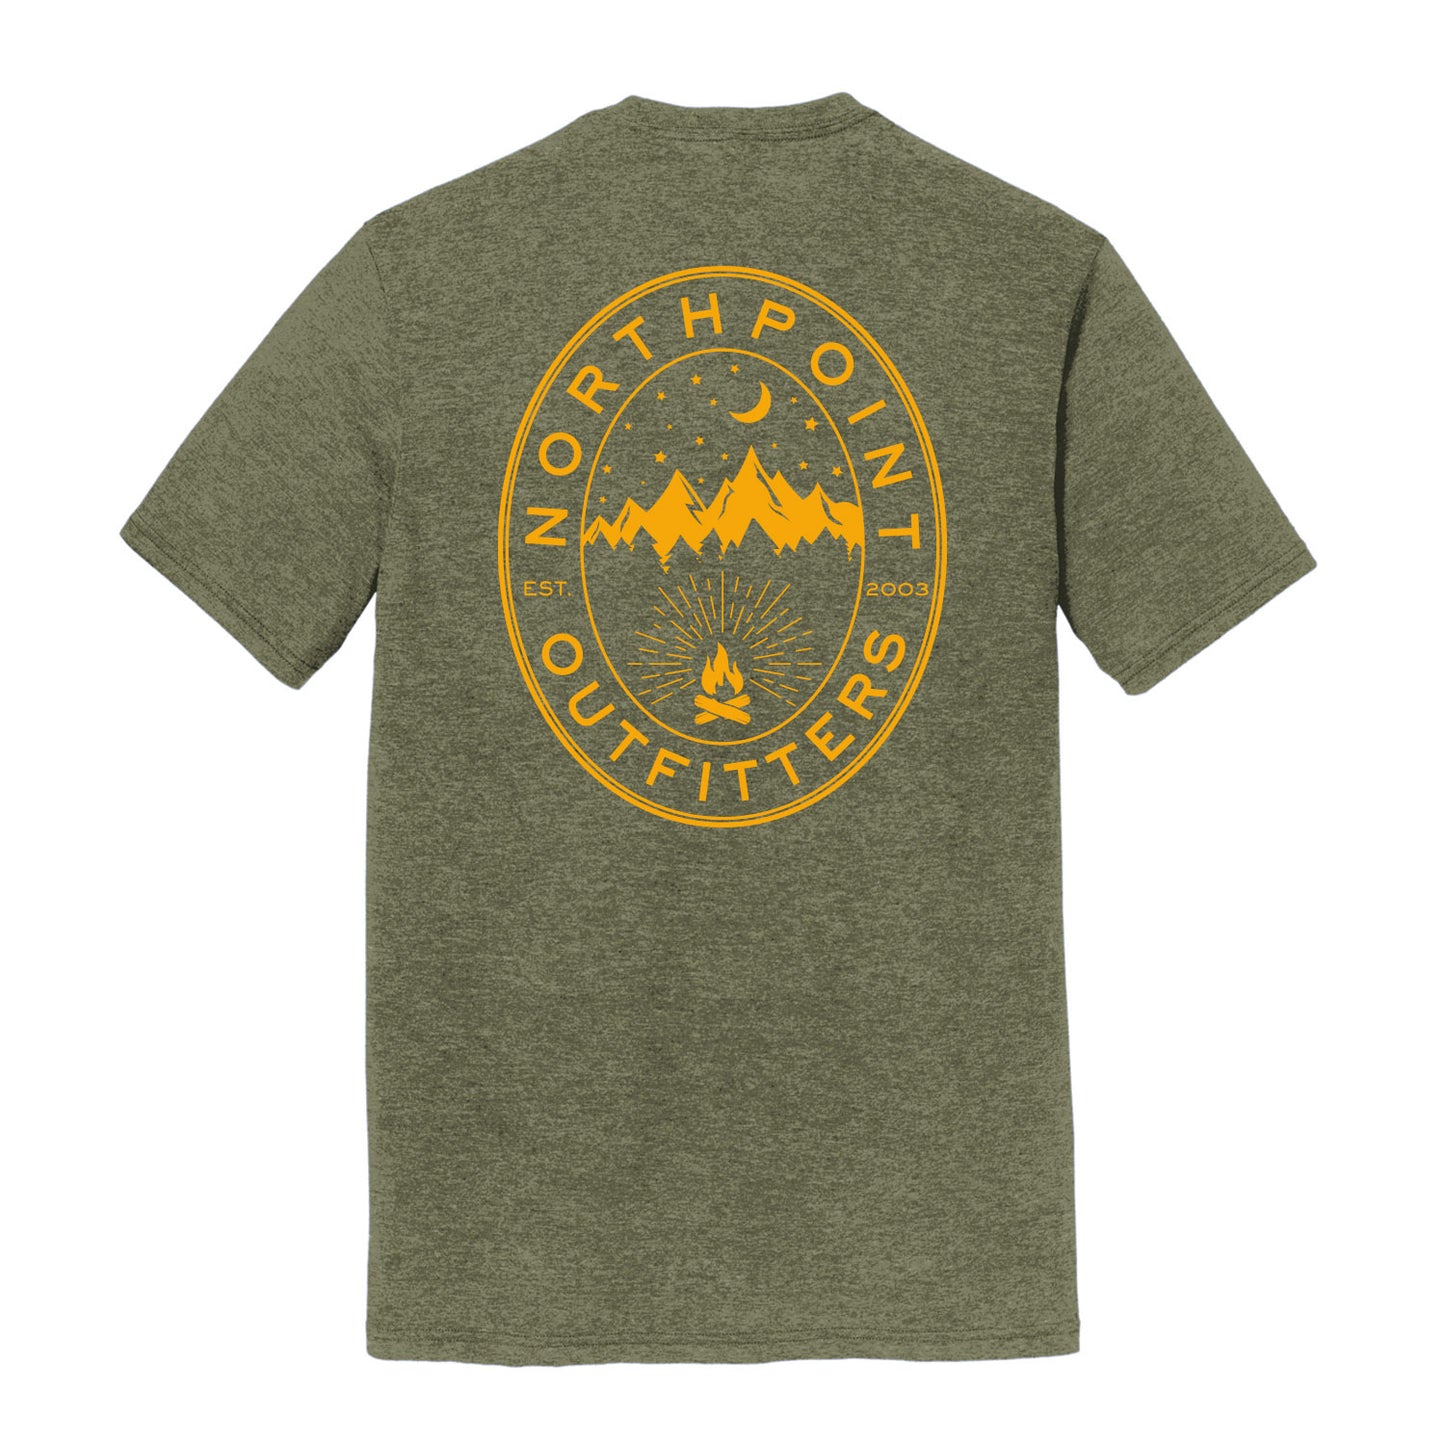 NorthPoint Outfitters T-Shirt